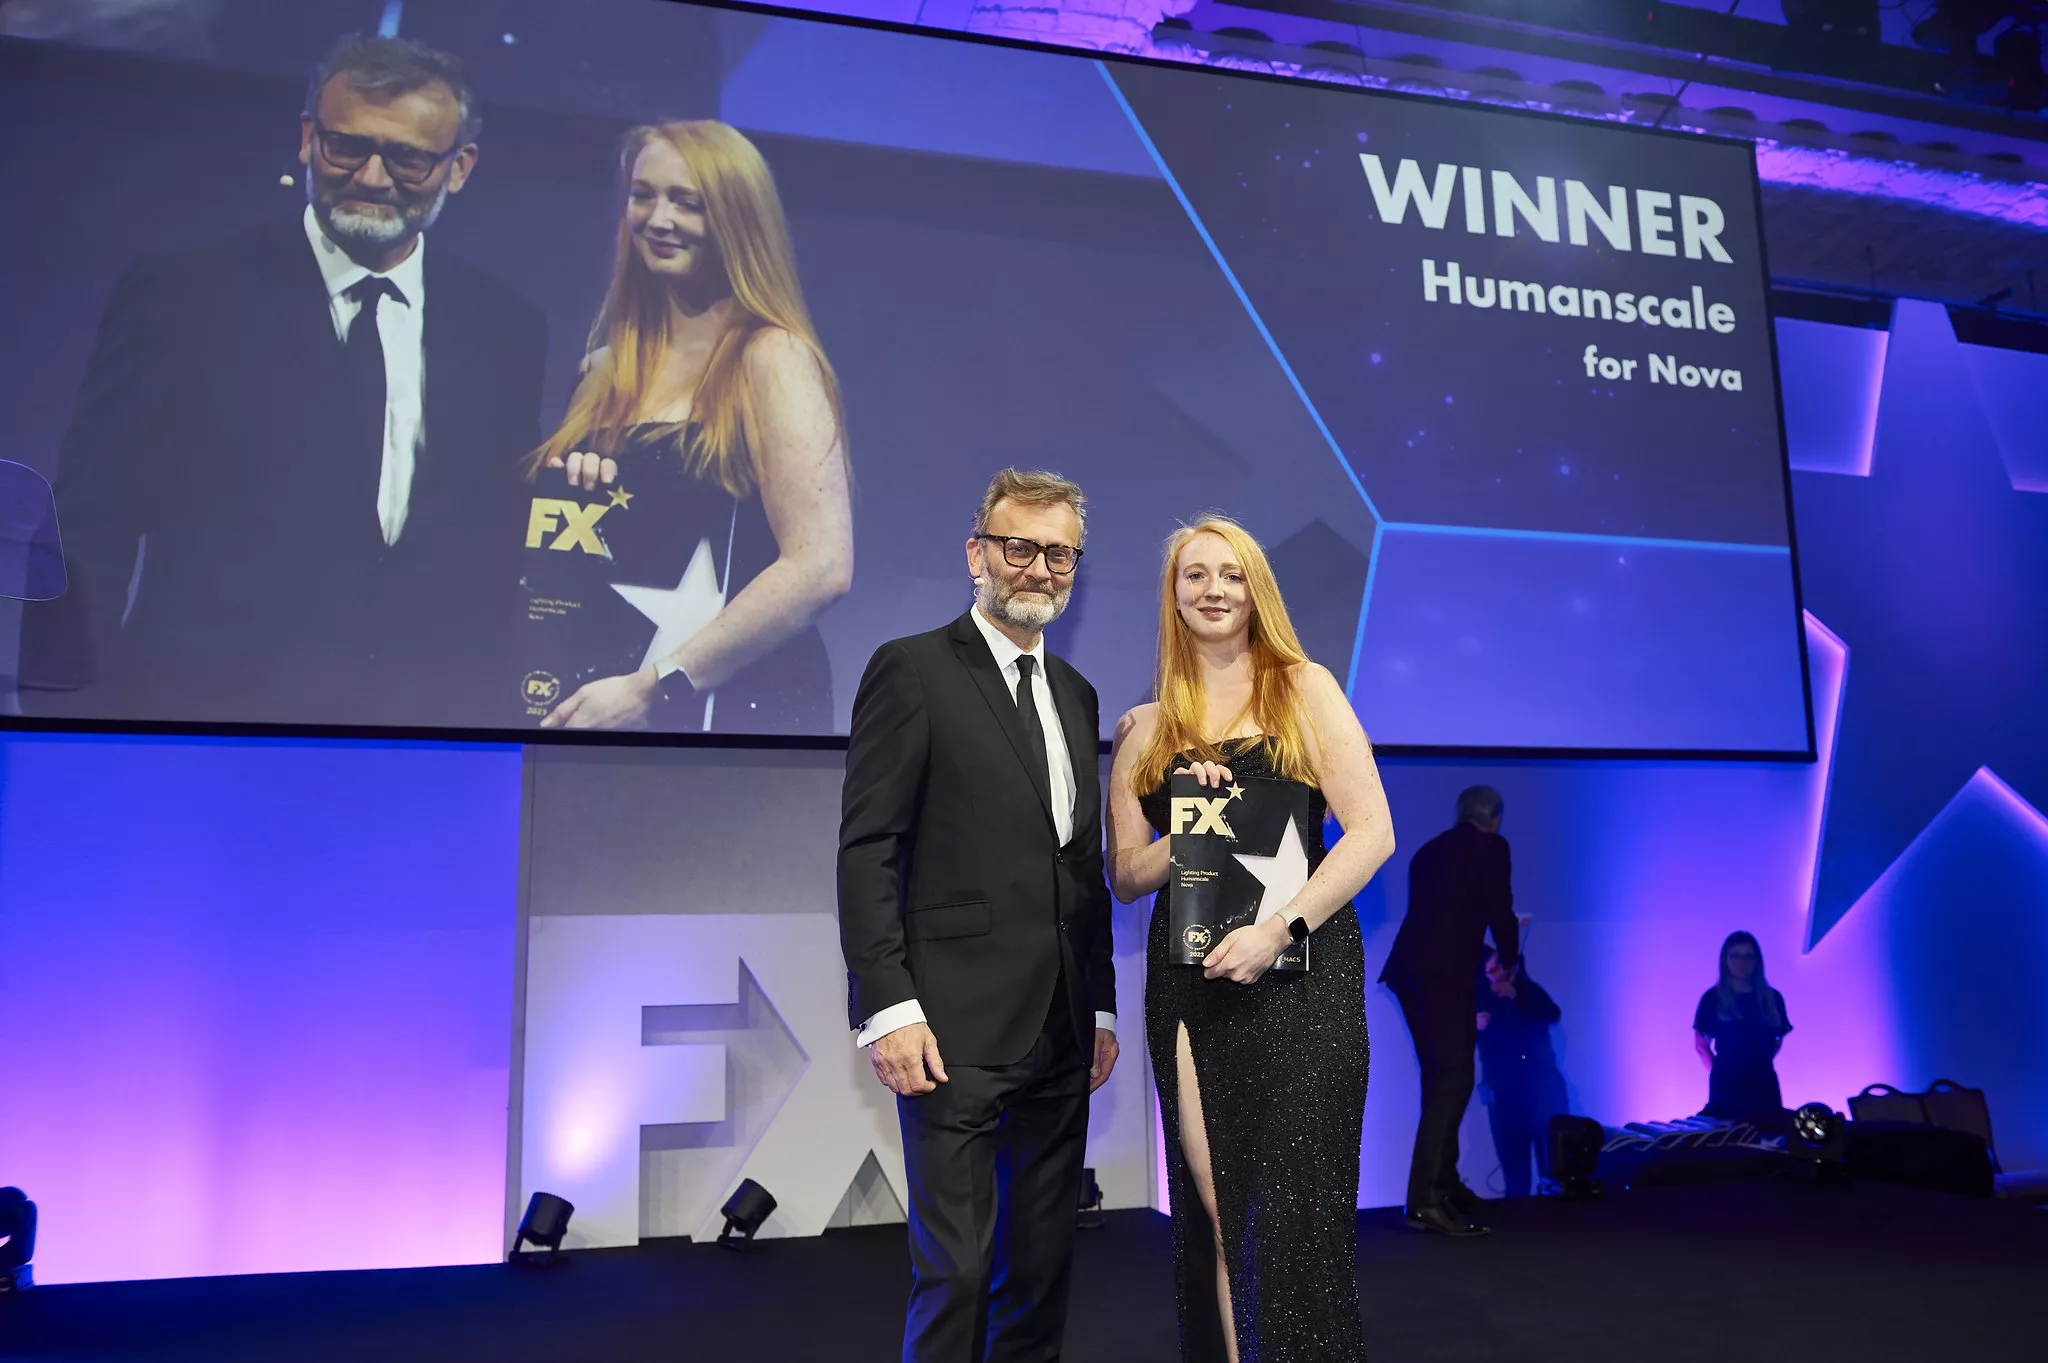 HIMACS is proud to sponsor the FX Design Awards in 2023 for the second year running